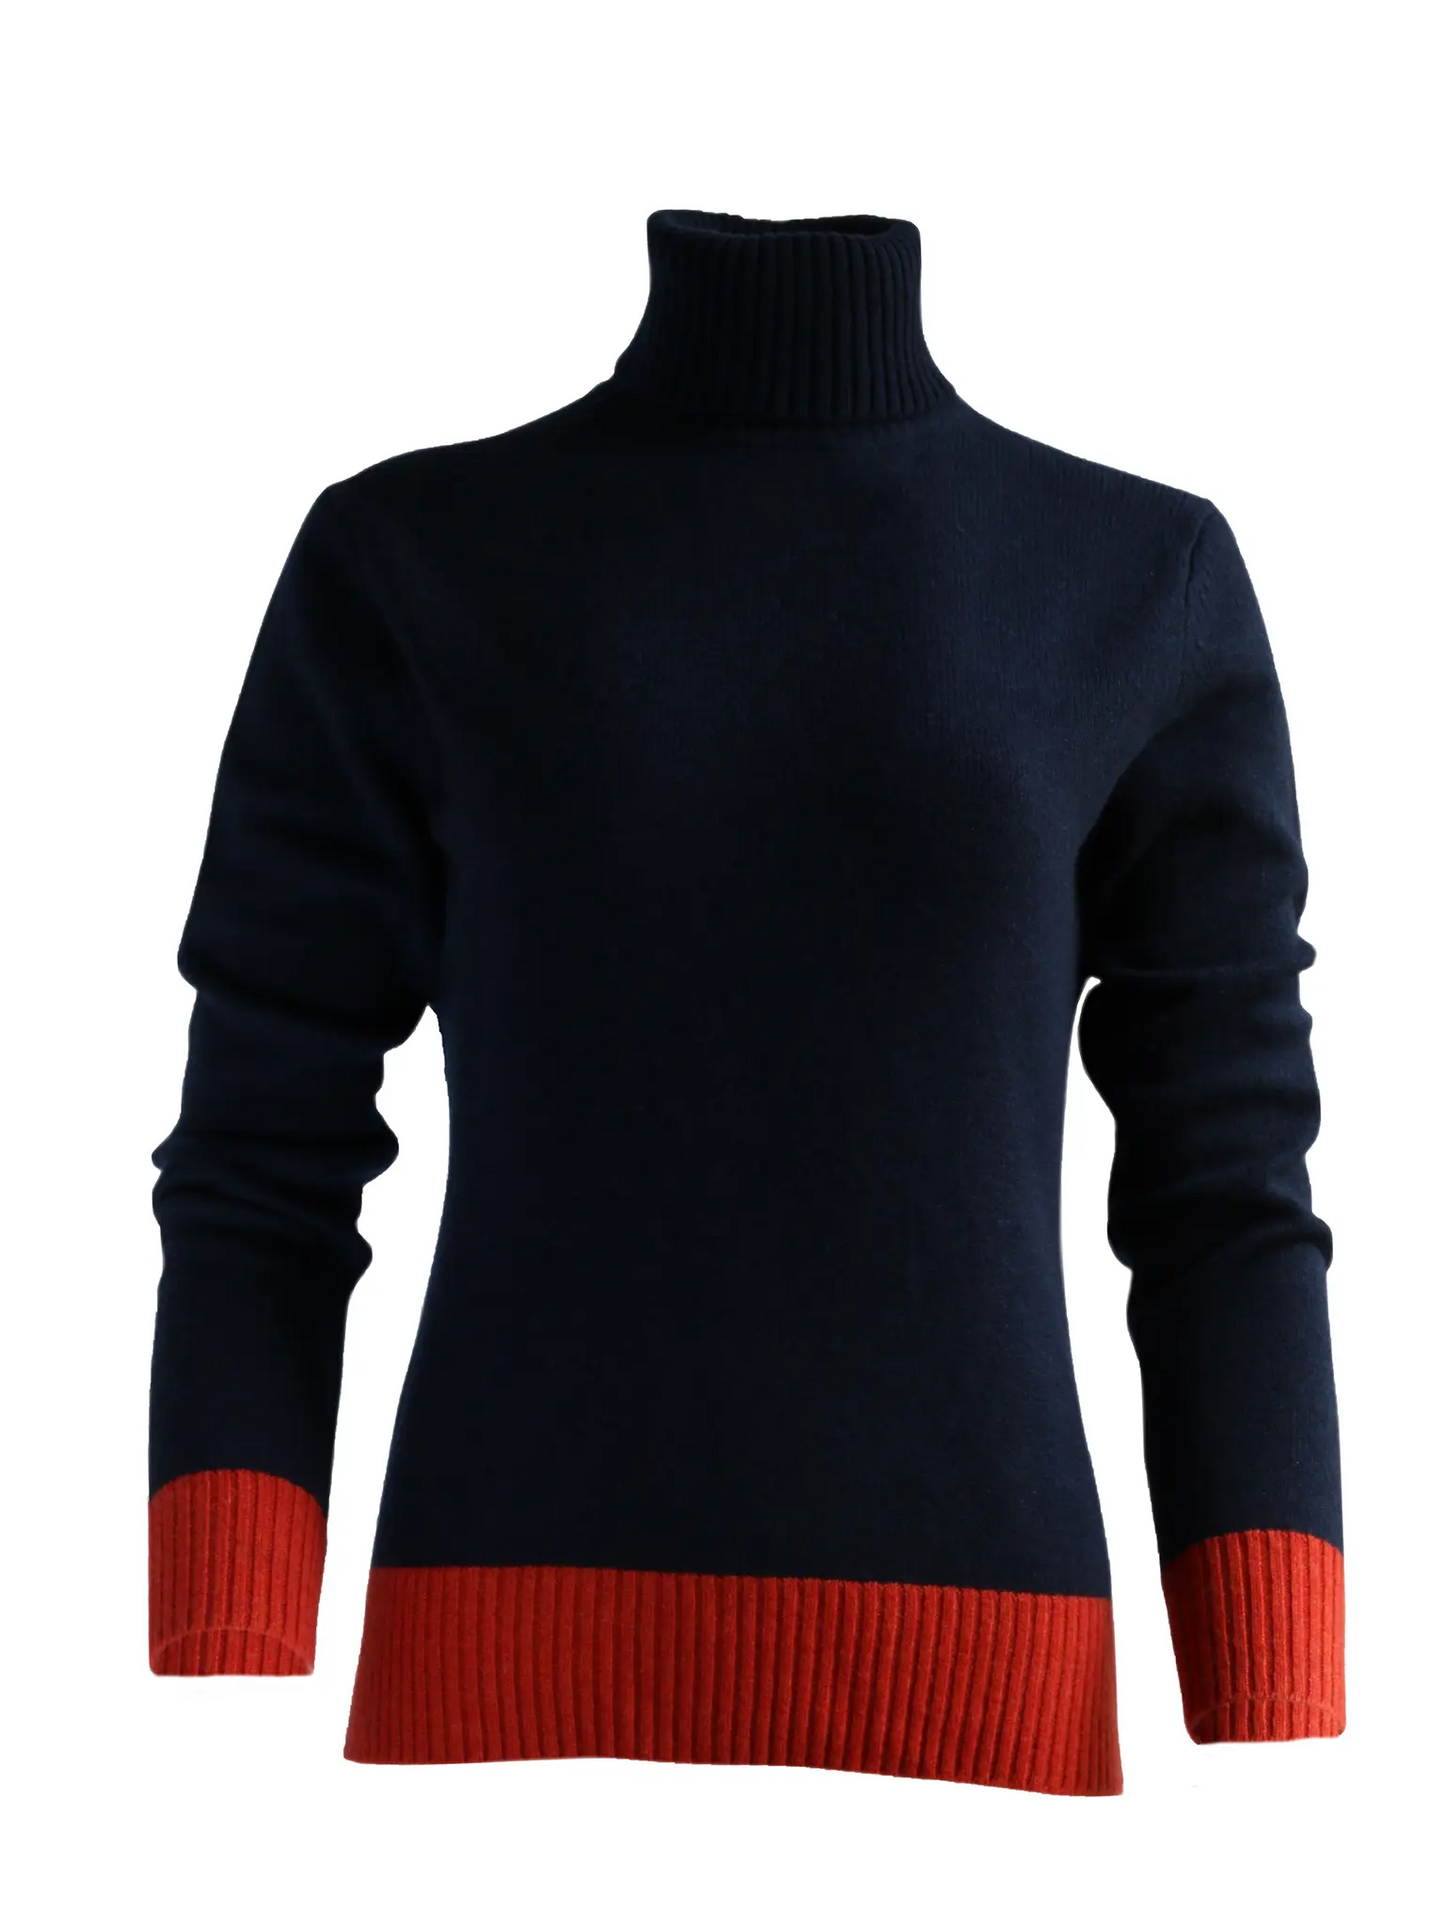 product picture of womens roll neck jumper front with burnt orange elbow patches cuff ends and hem